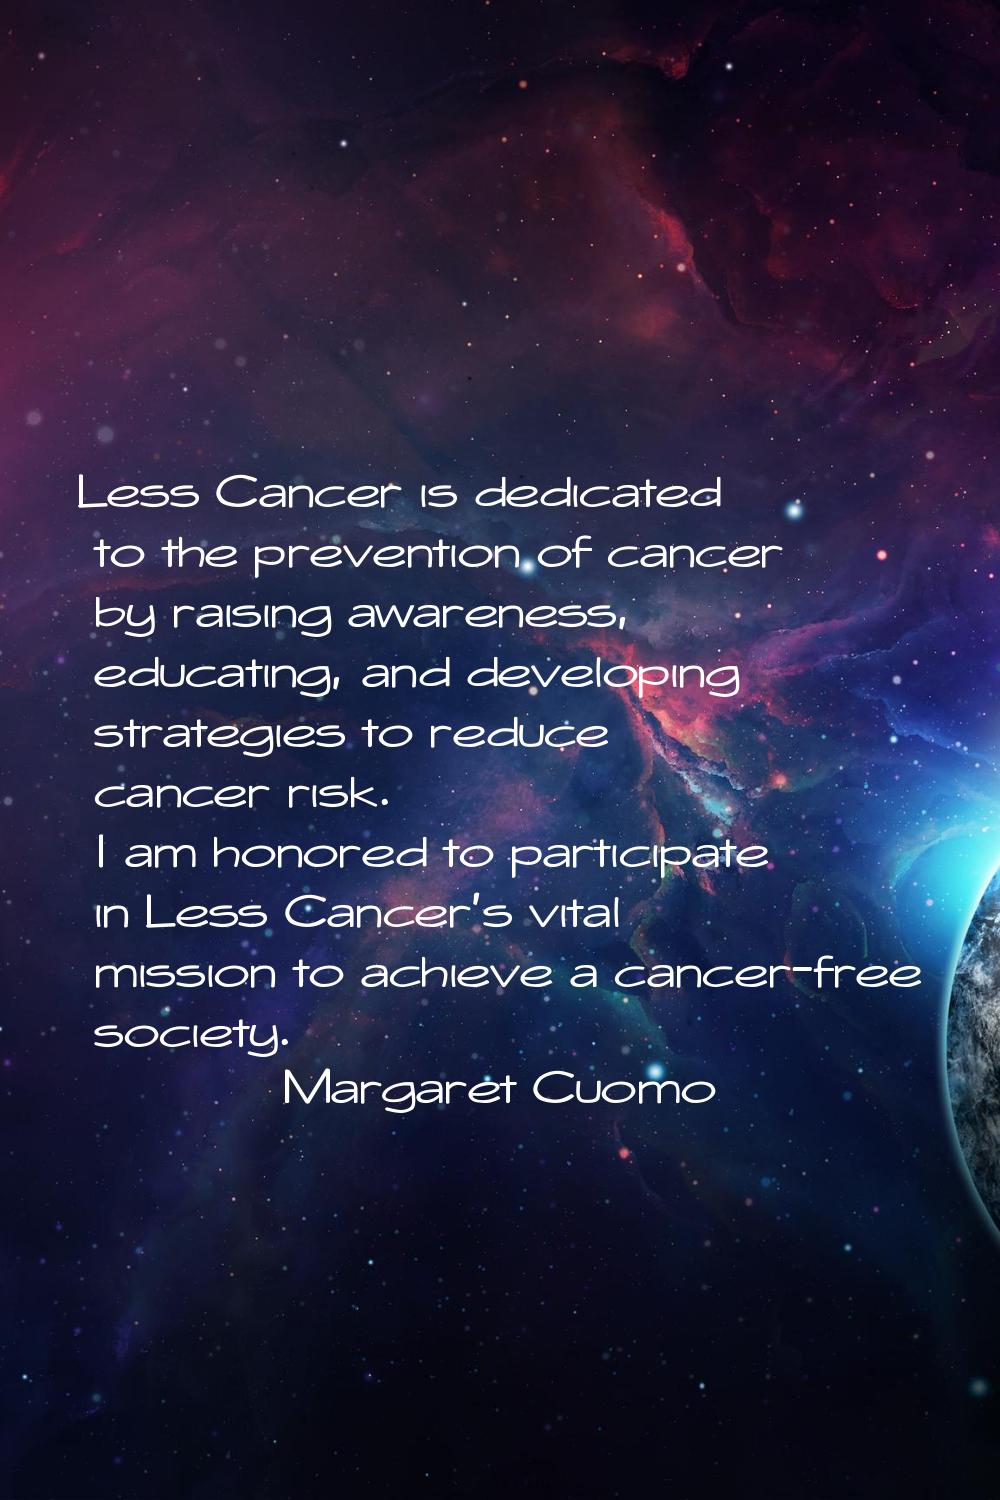 Less Cancer is dedicated to the prevention of cancer by raising awareness, educating, and developin